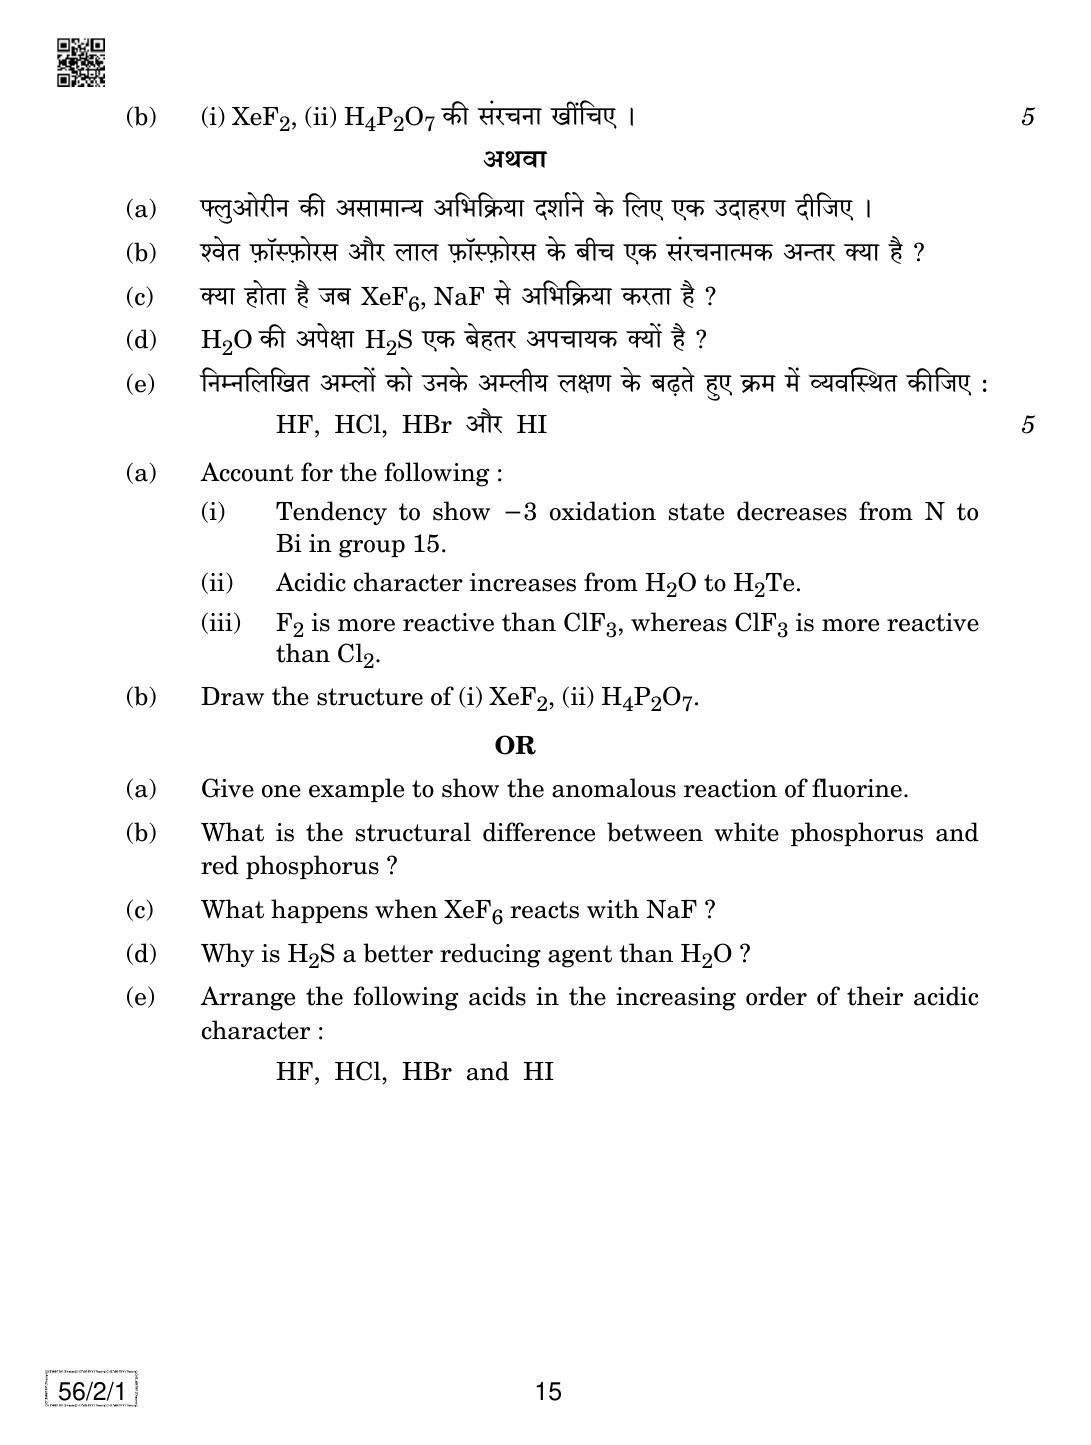 CBSE Class 12 56-2-1 Chemistry 2019 Question Paper - Page 15